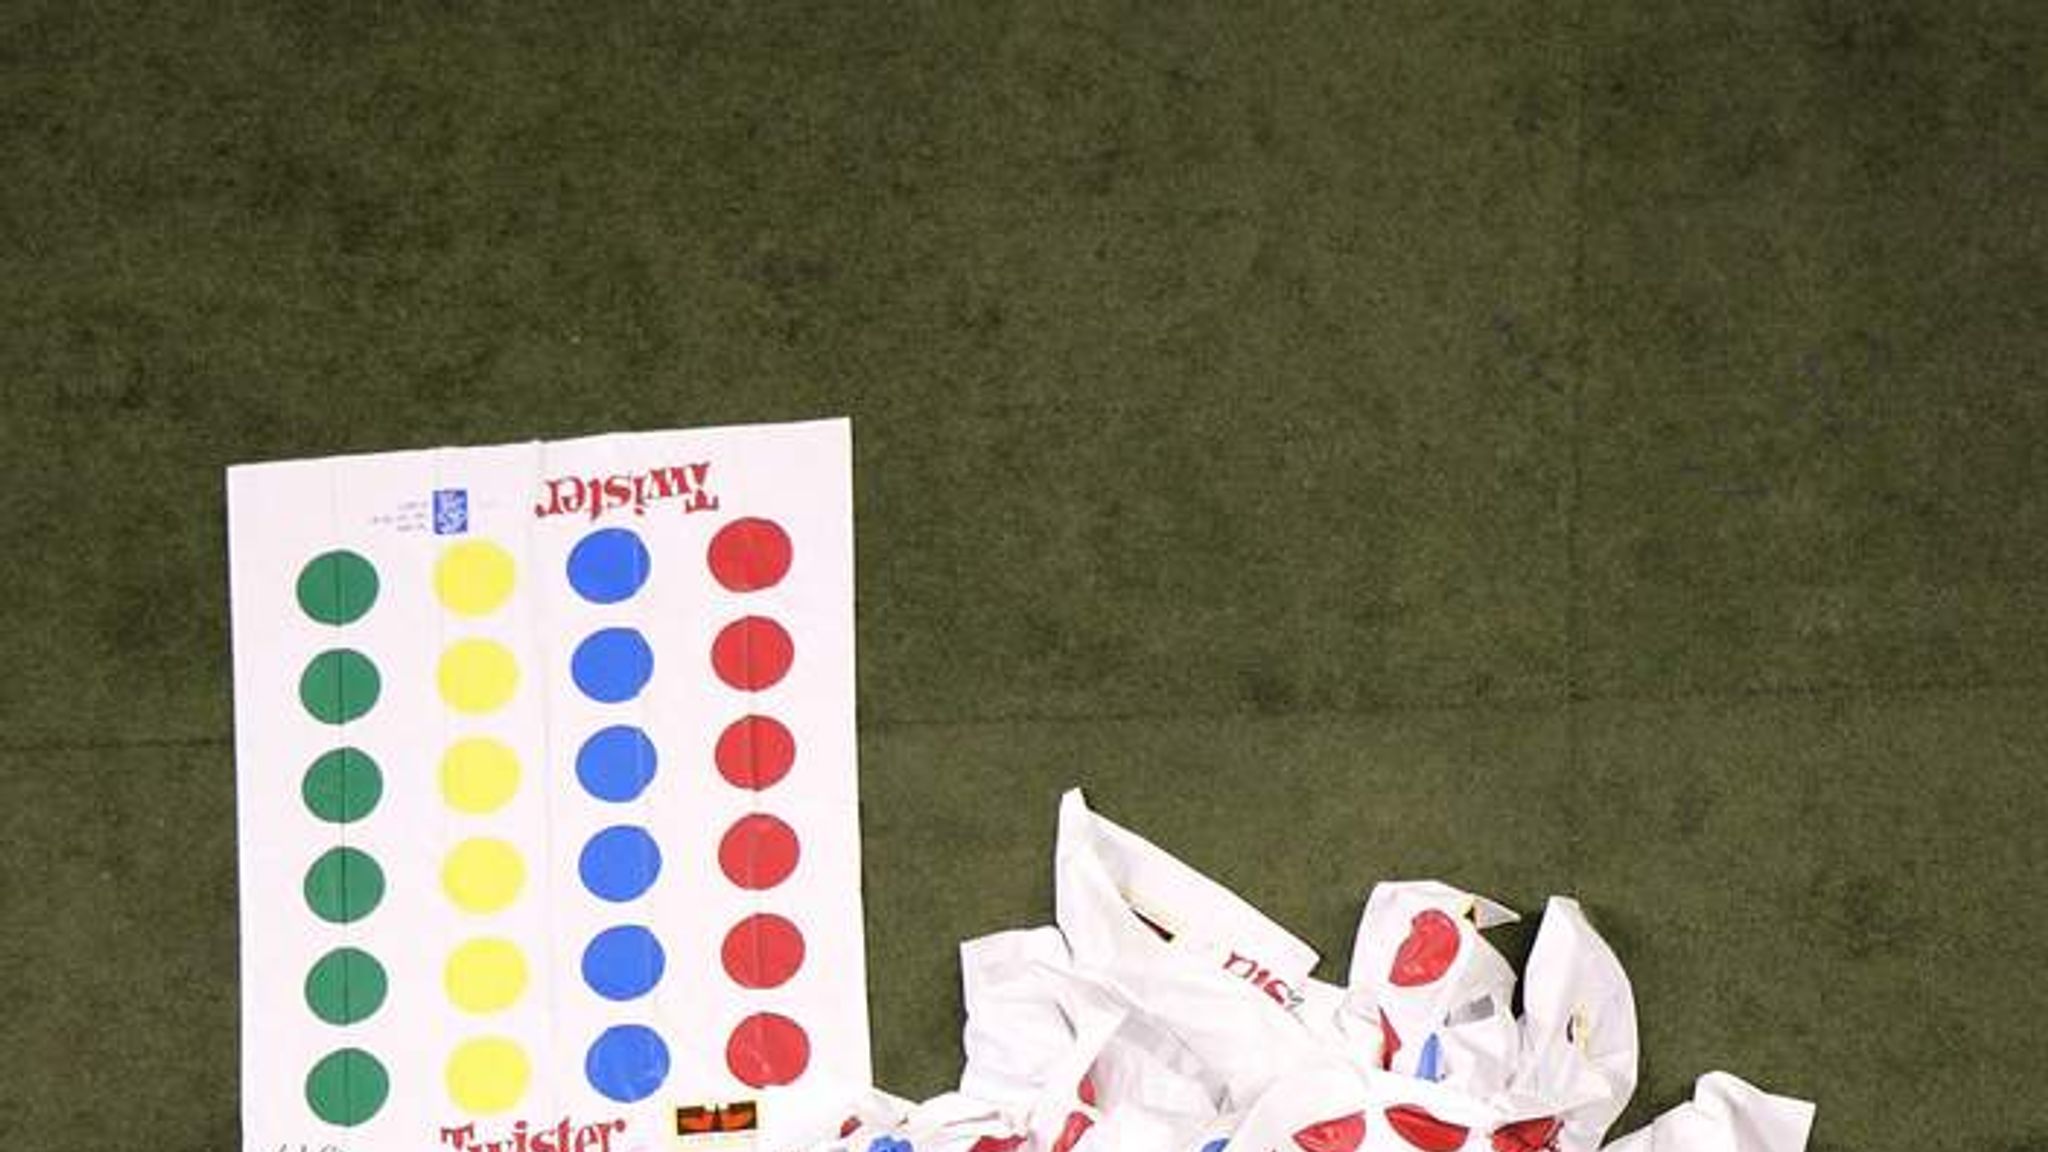 Chuck Foley, Co-Creator of the Game Twister, Dies at 82 - The New